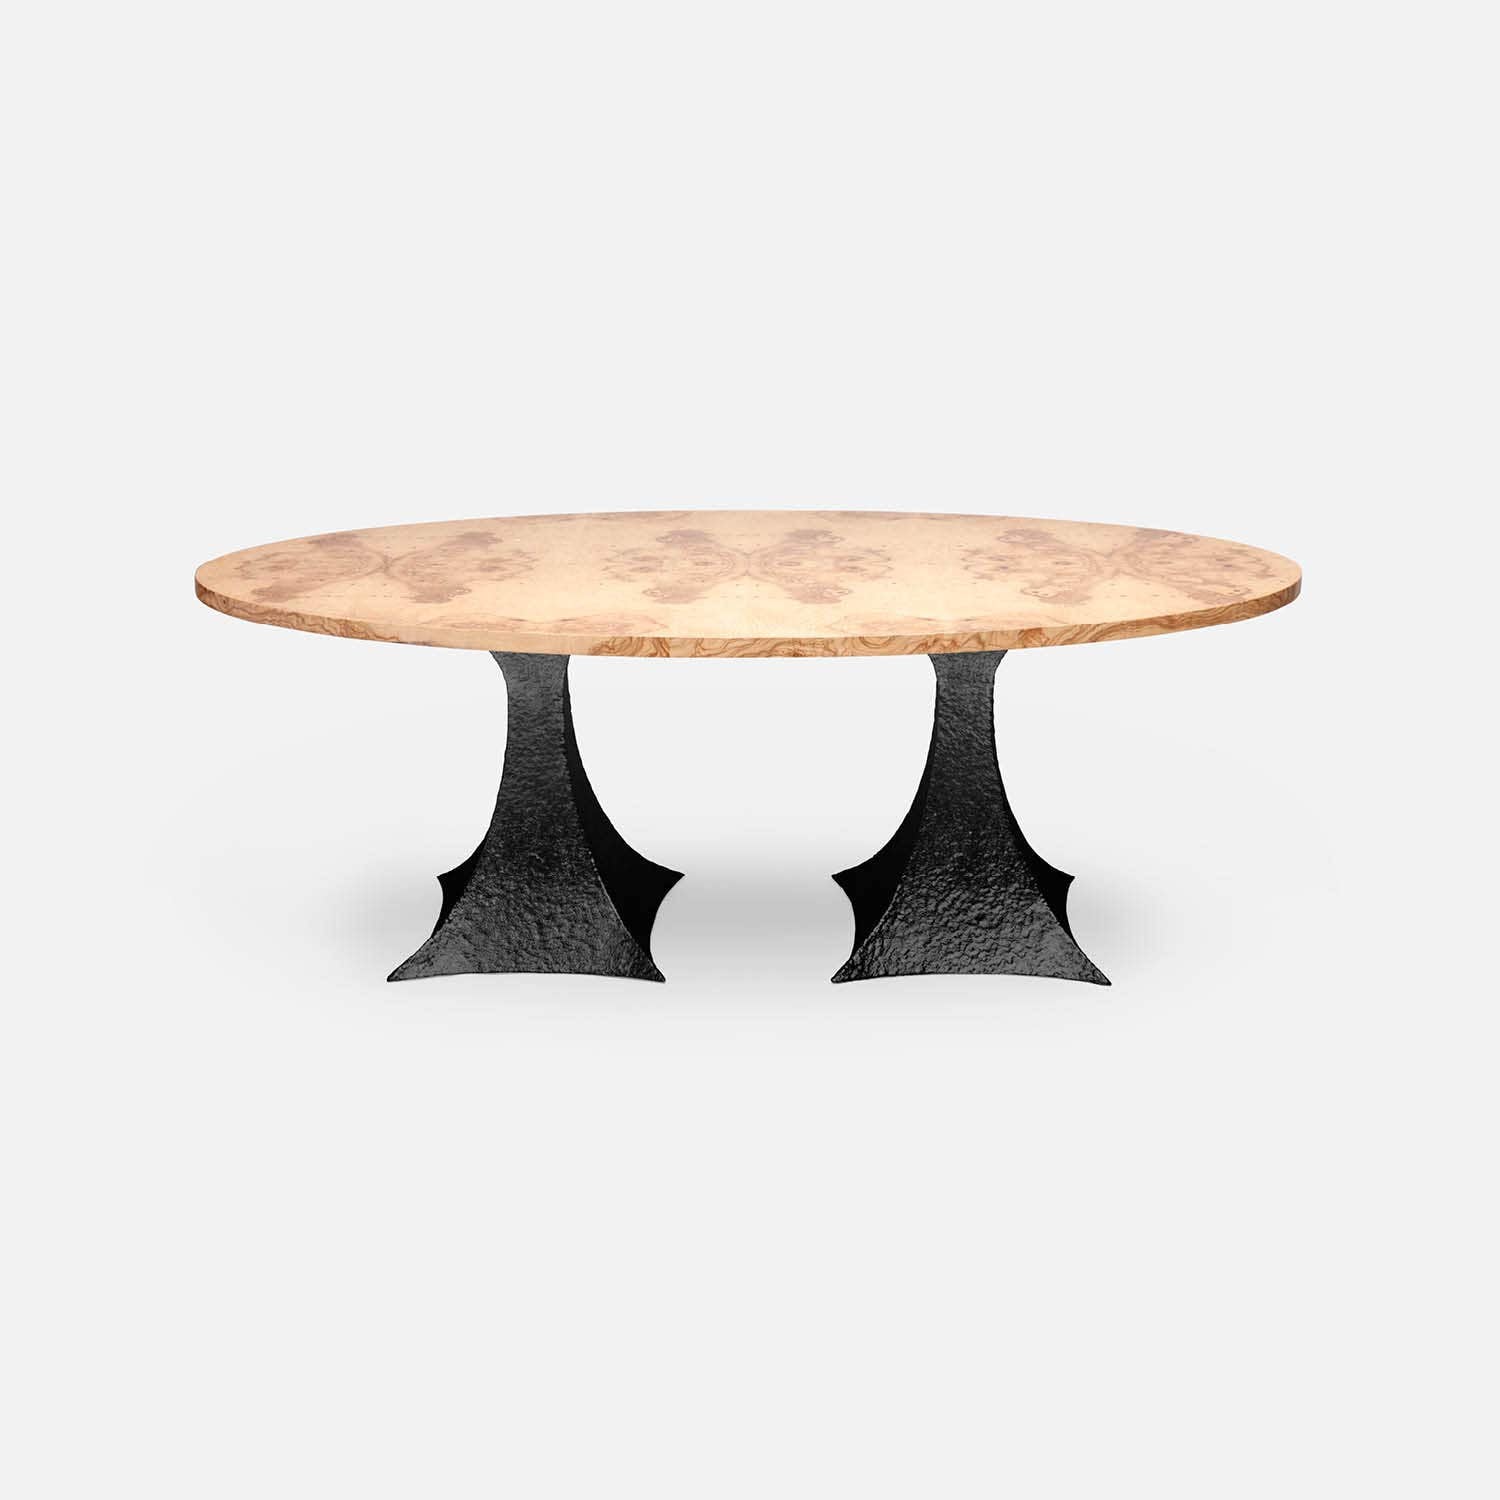 Made Goods Noor 84" x 42" x 30" Double Base Bumpy Black Iron Dinning Table With Oval Olive Ash Veneer Table Top